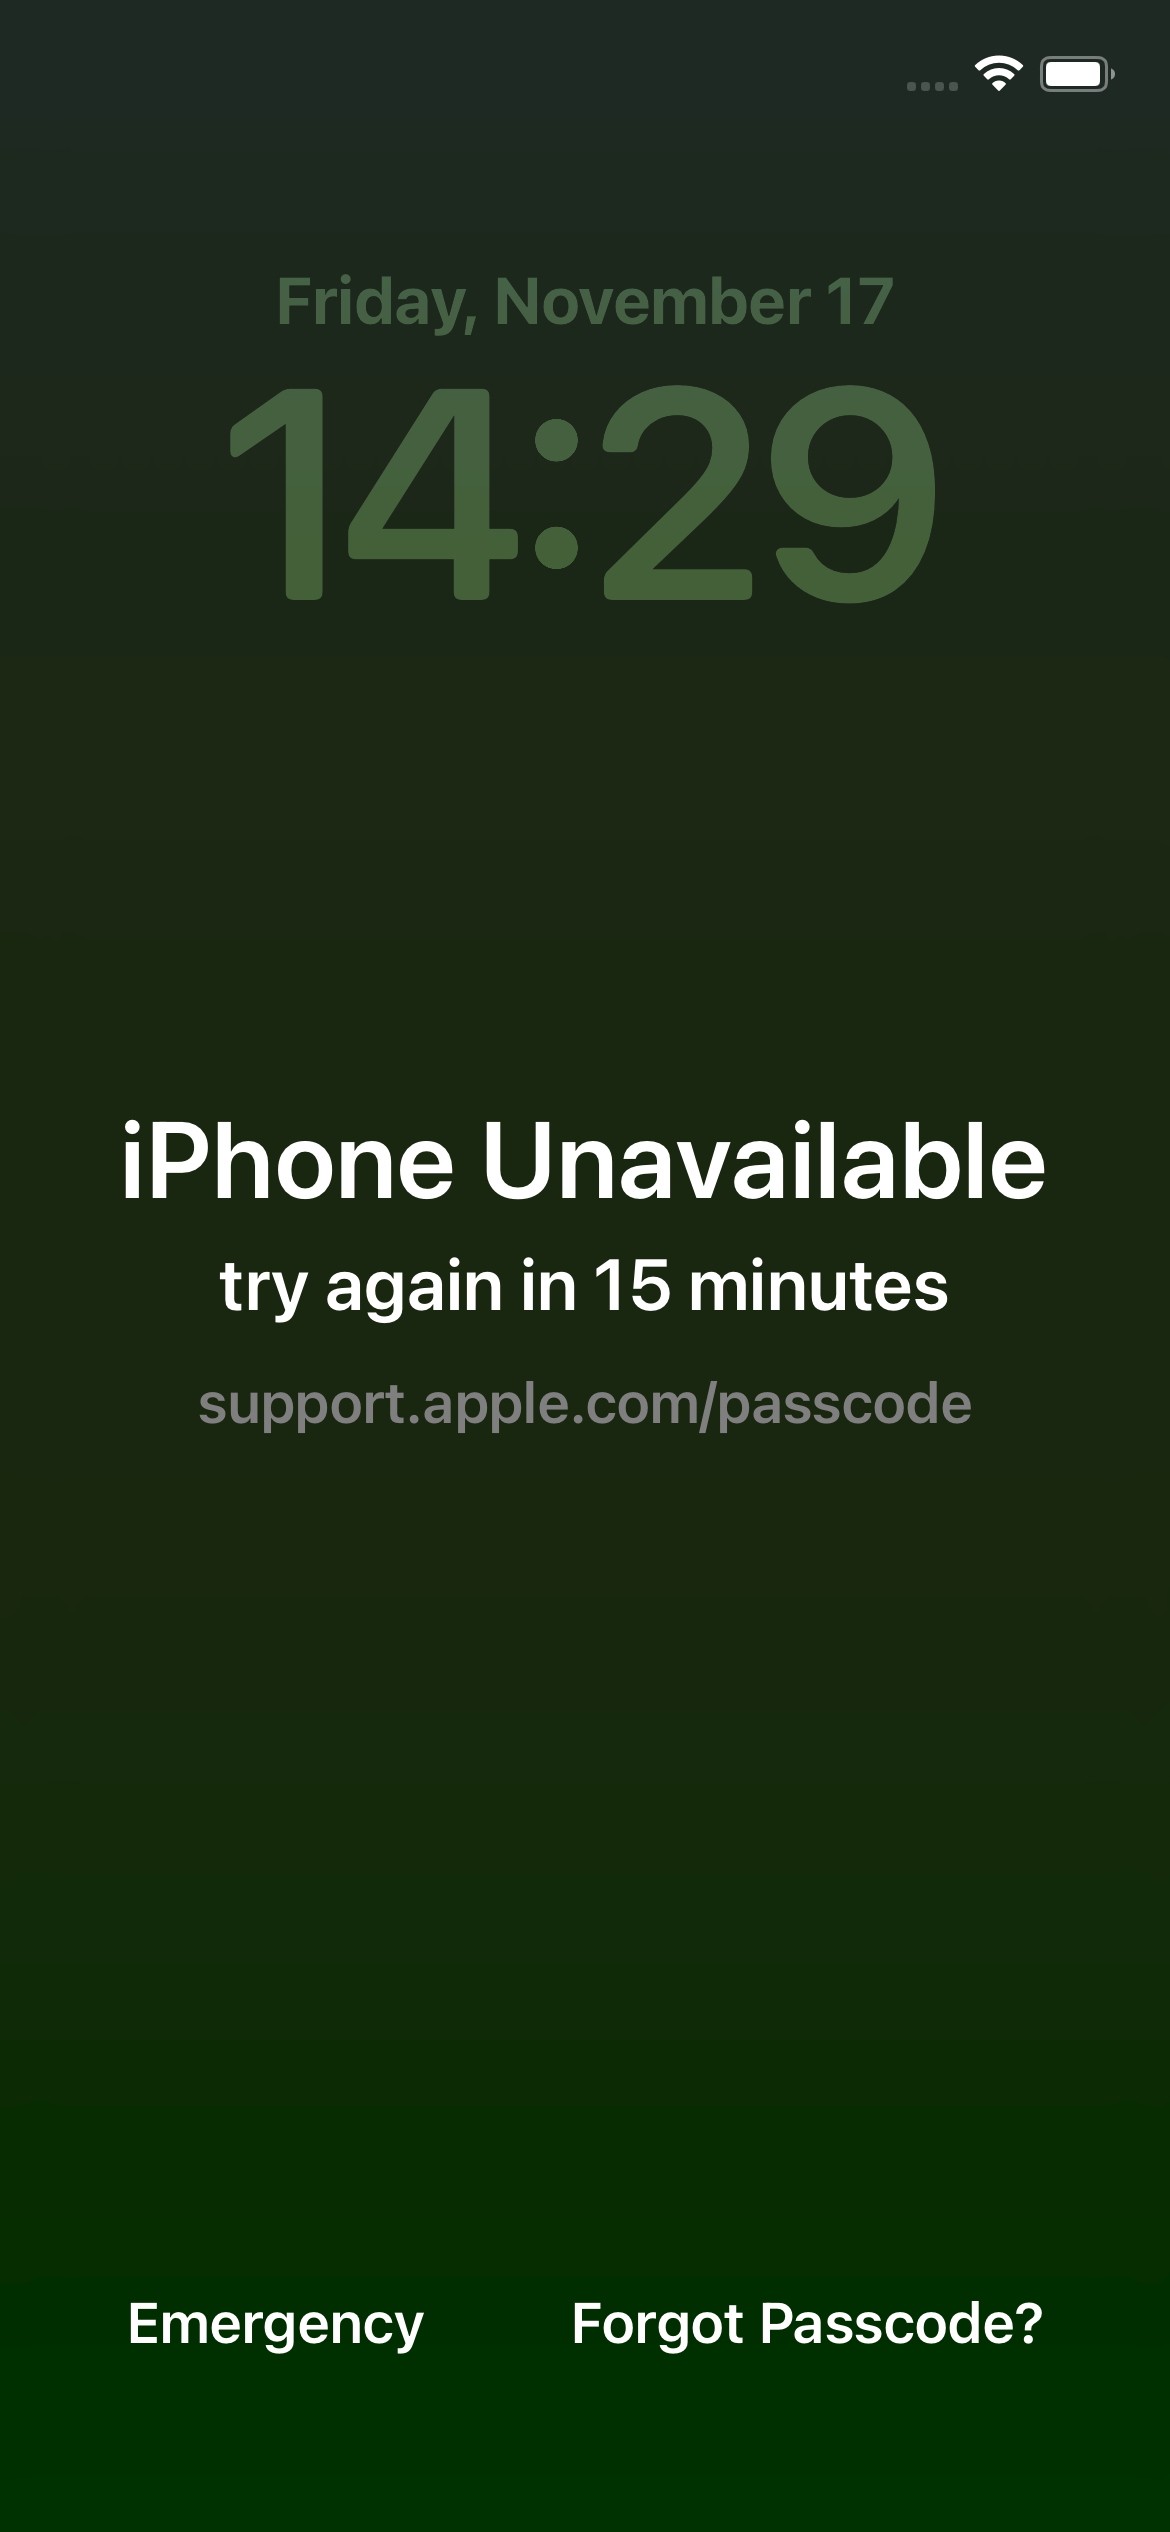 iPhone Unavailable Try Again in 15 Minutes Interface